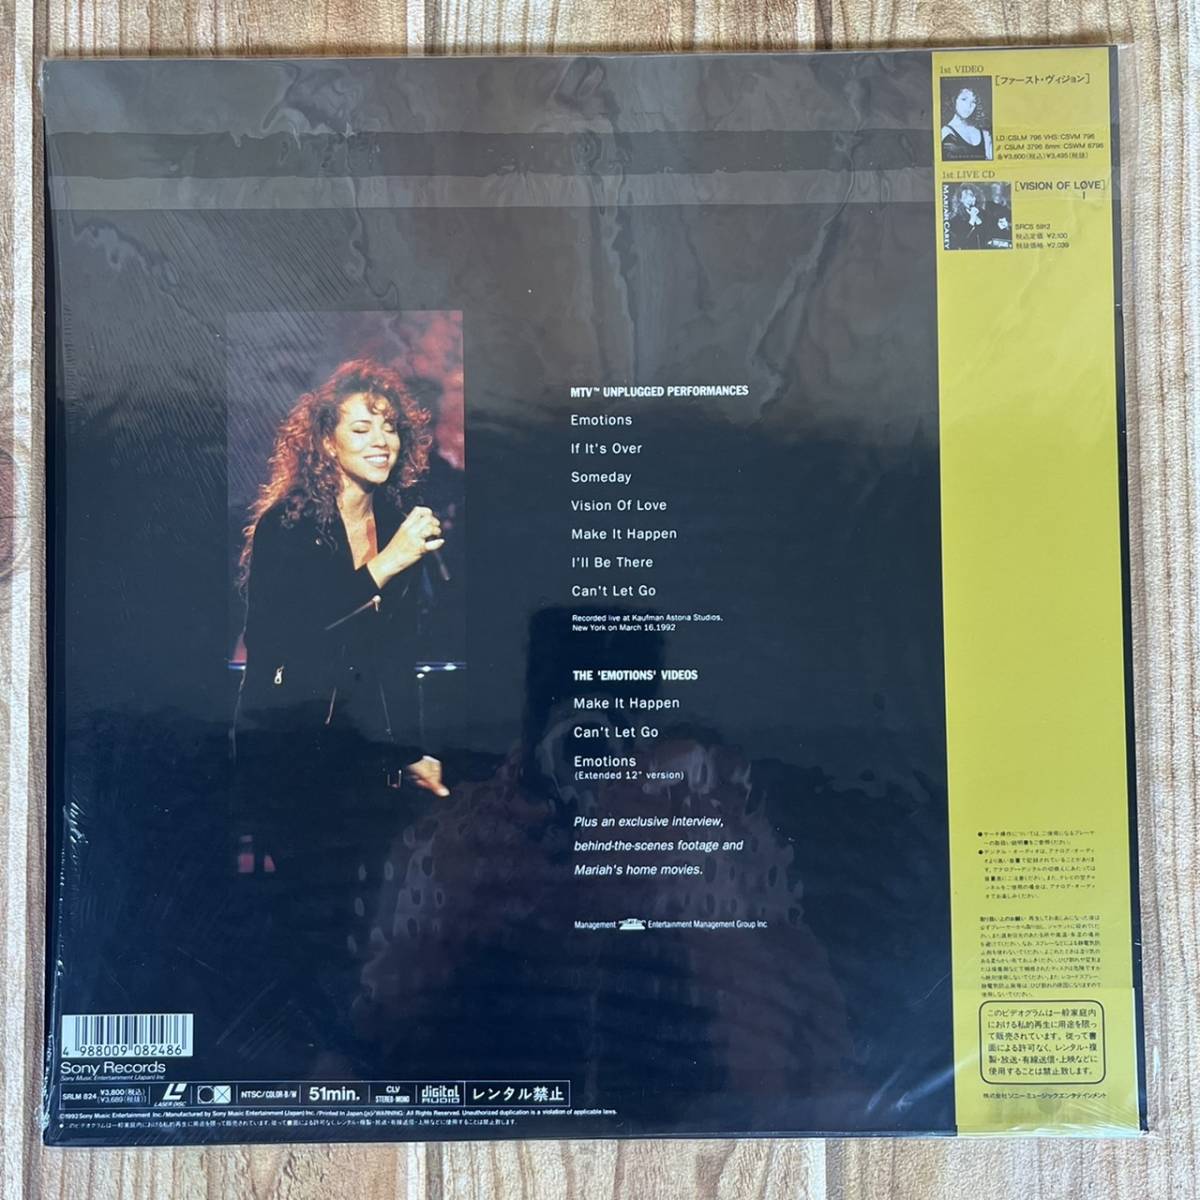  ultra rare! laser disk MARIAH CAREYmalaia Carry VISION OF LIVE * ultimate beautiful goods protection sleeve attaching A0151